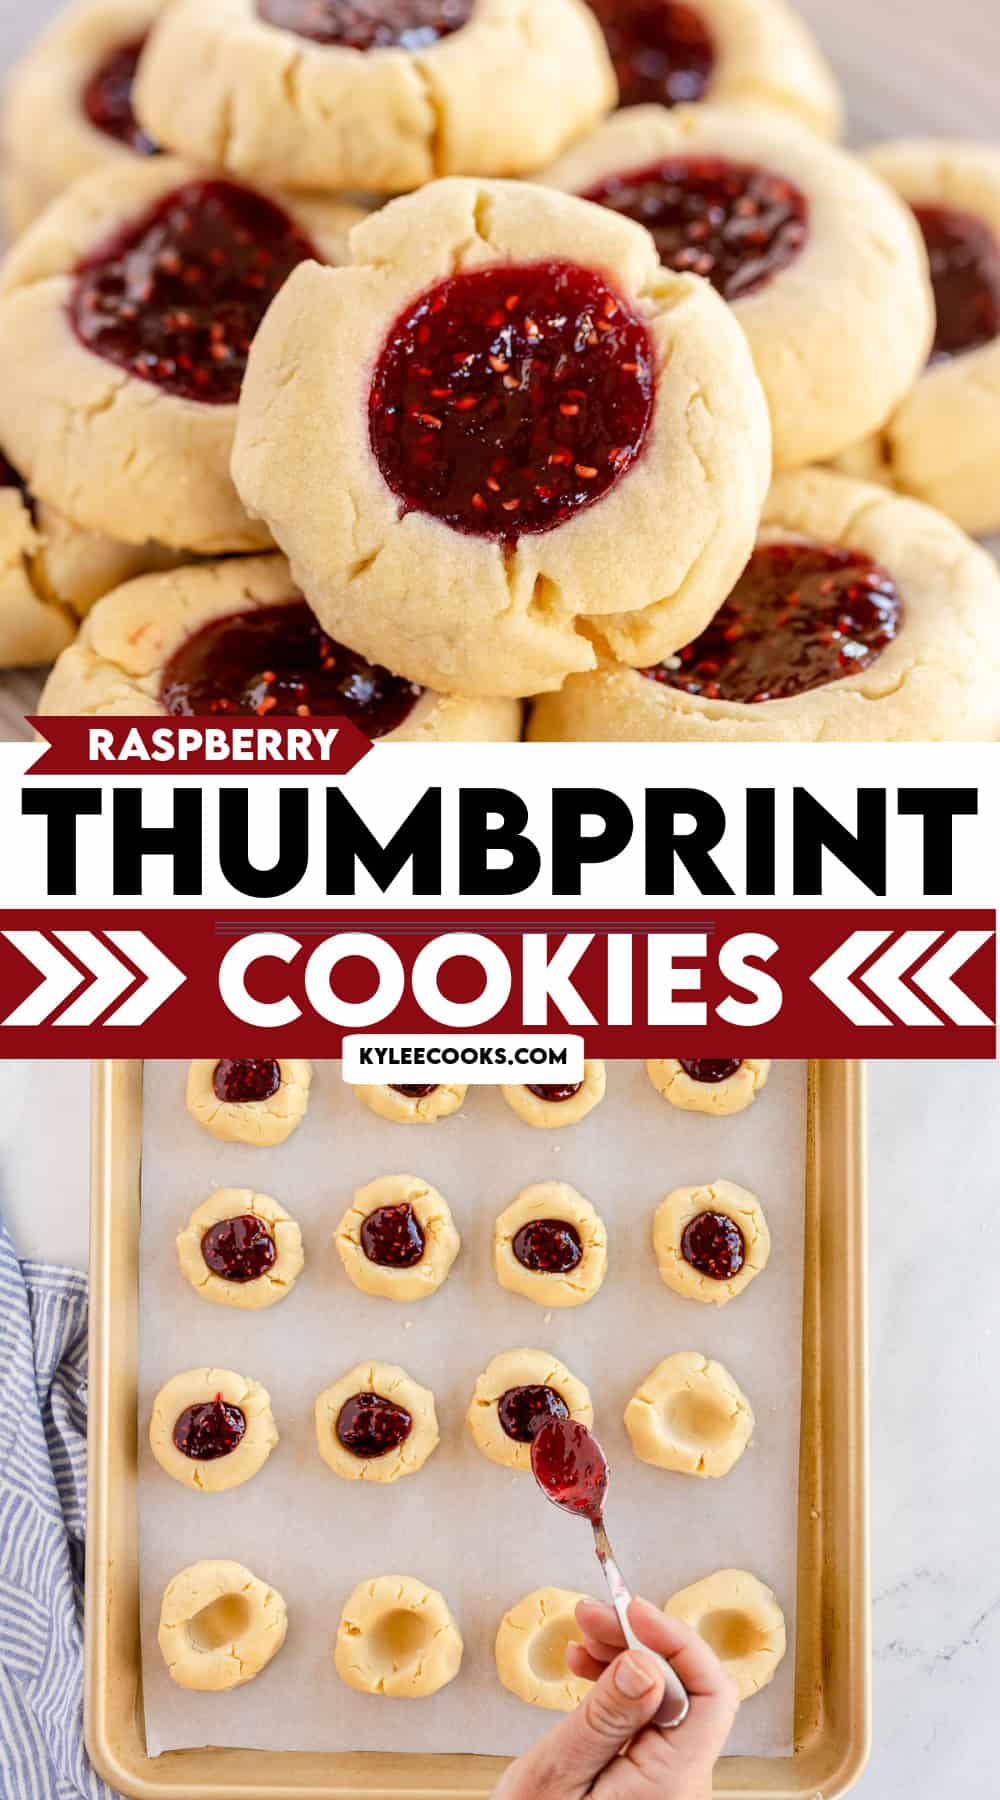 thumbprint cookie collage image with recipe name overlaid in text.